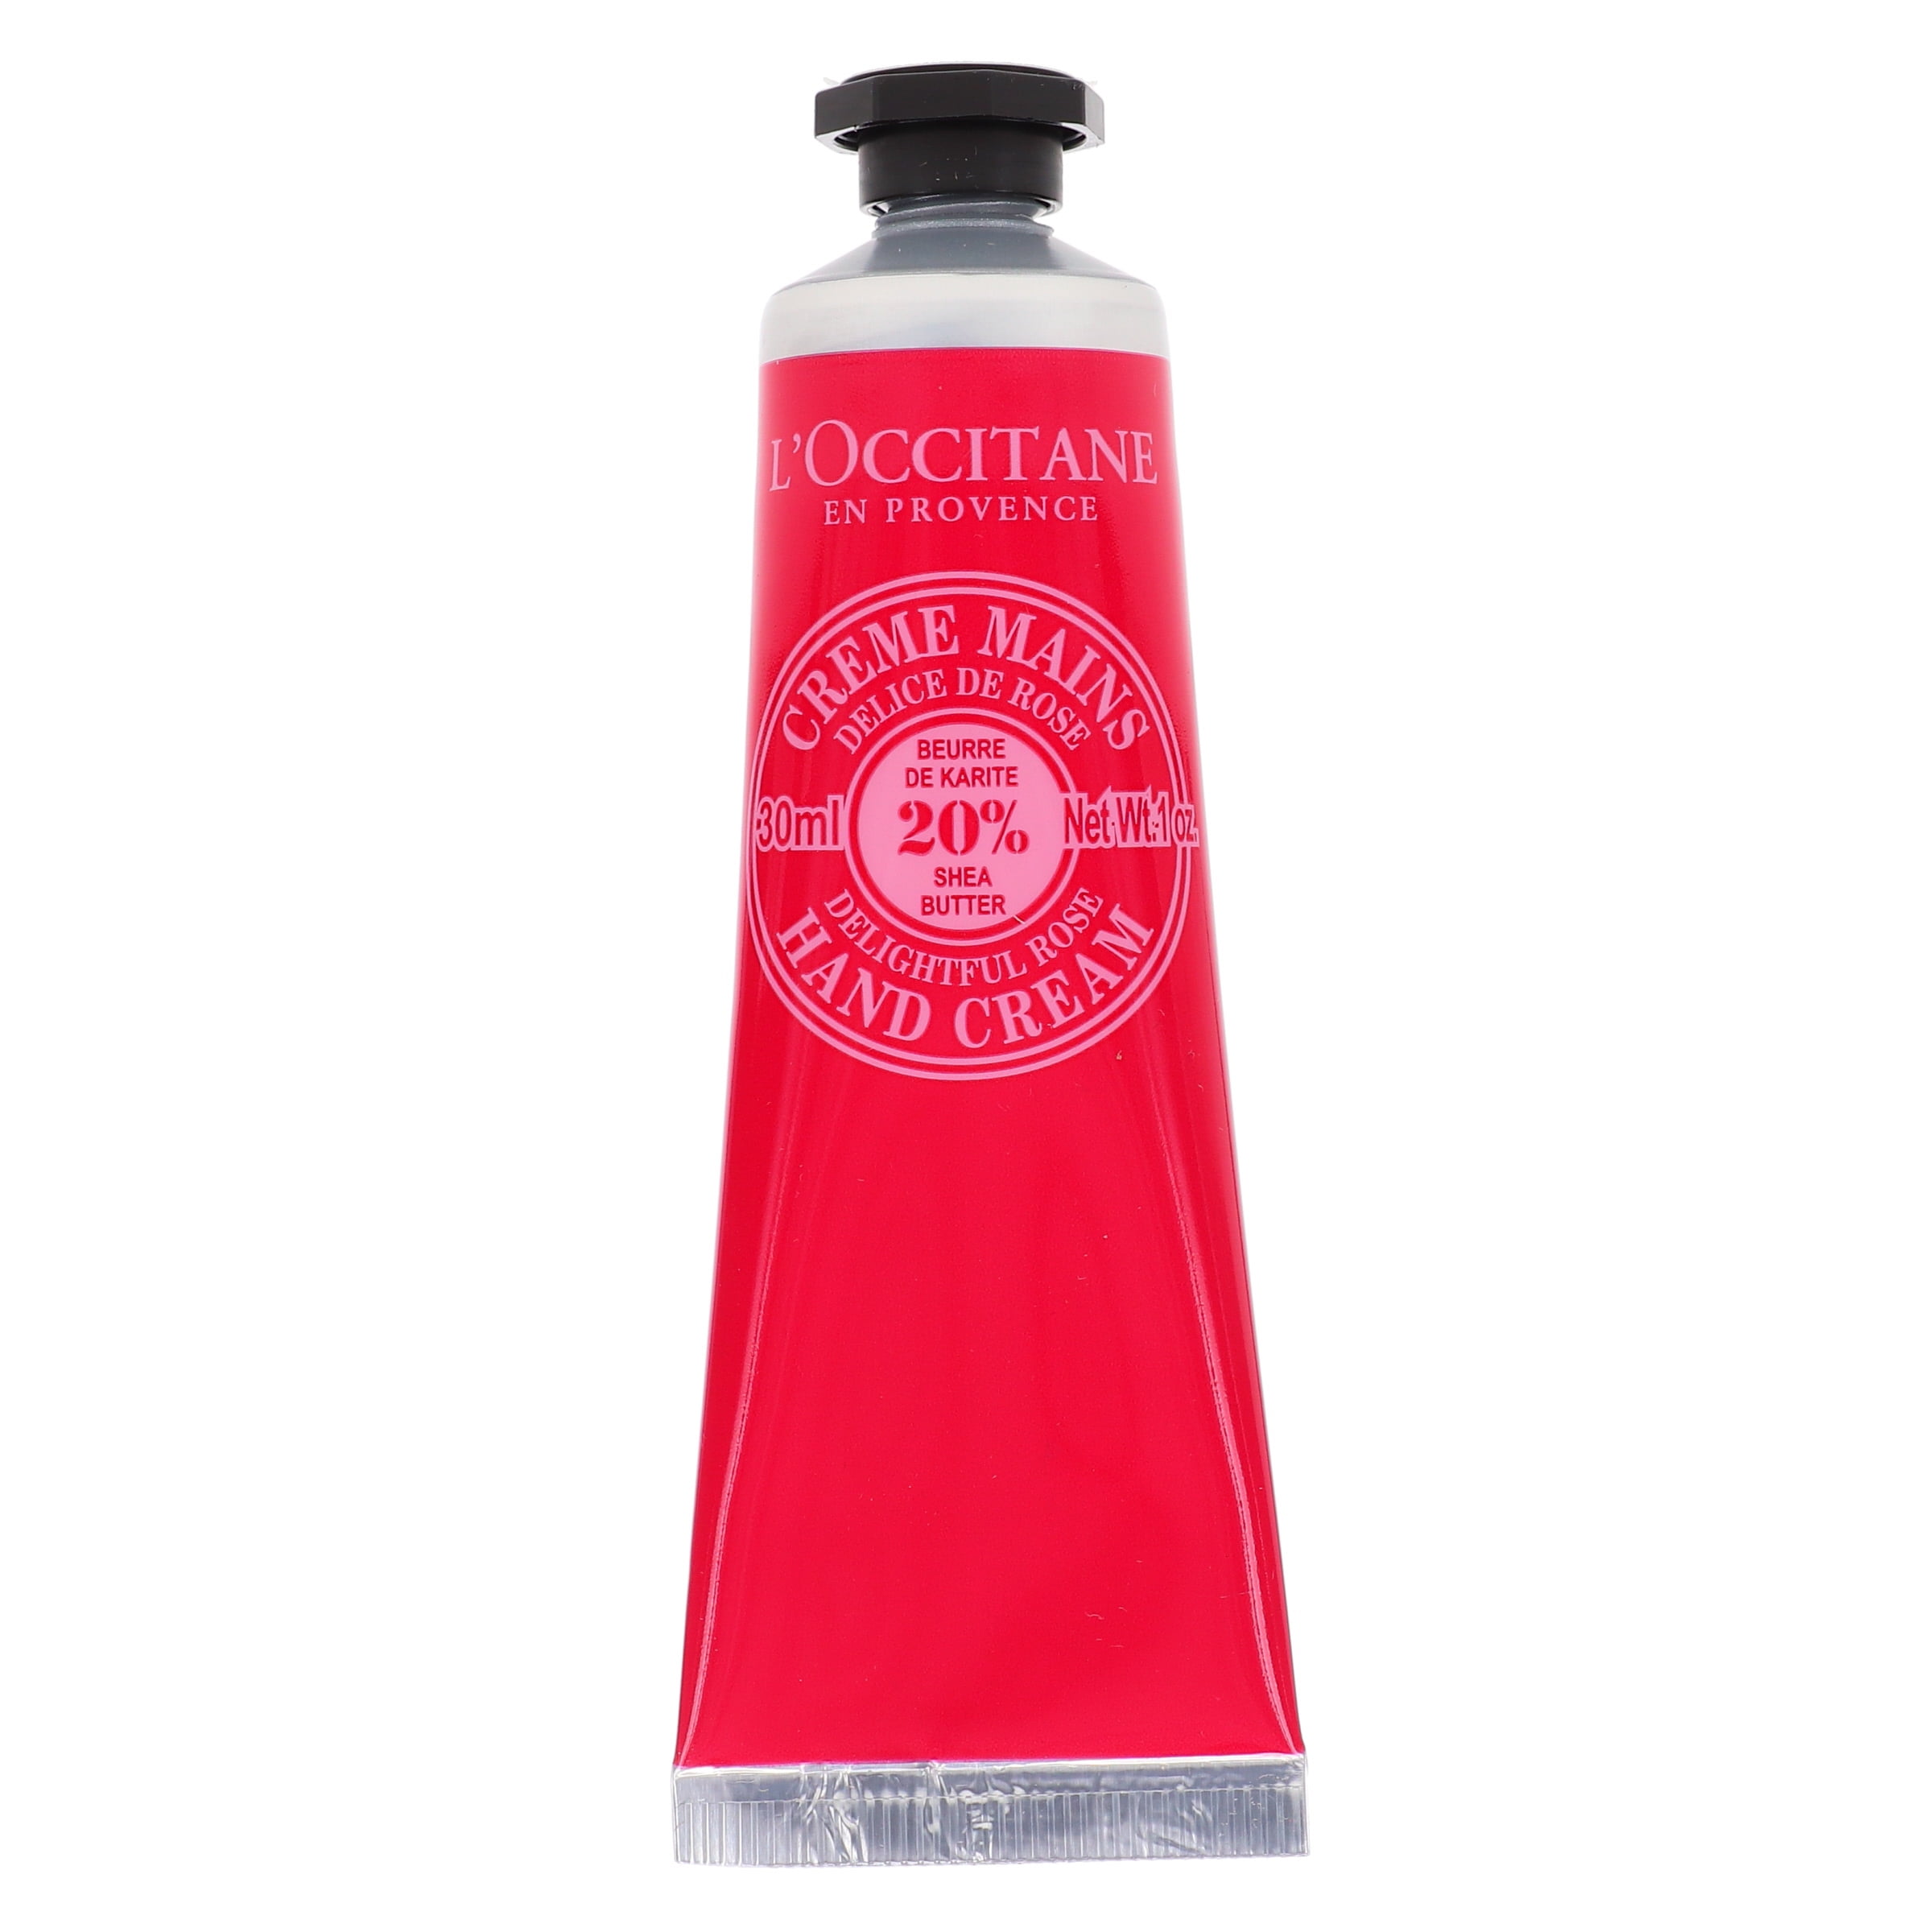 L'Occitane Shea Butter Hand Cream (Travel Size) 30ml/1oz 30ml/1oz buy in  United States with free shipping CosmoStore